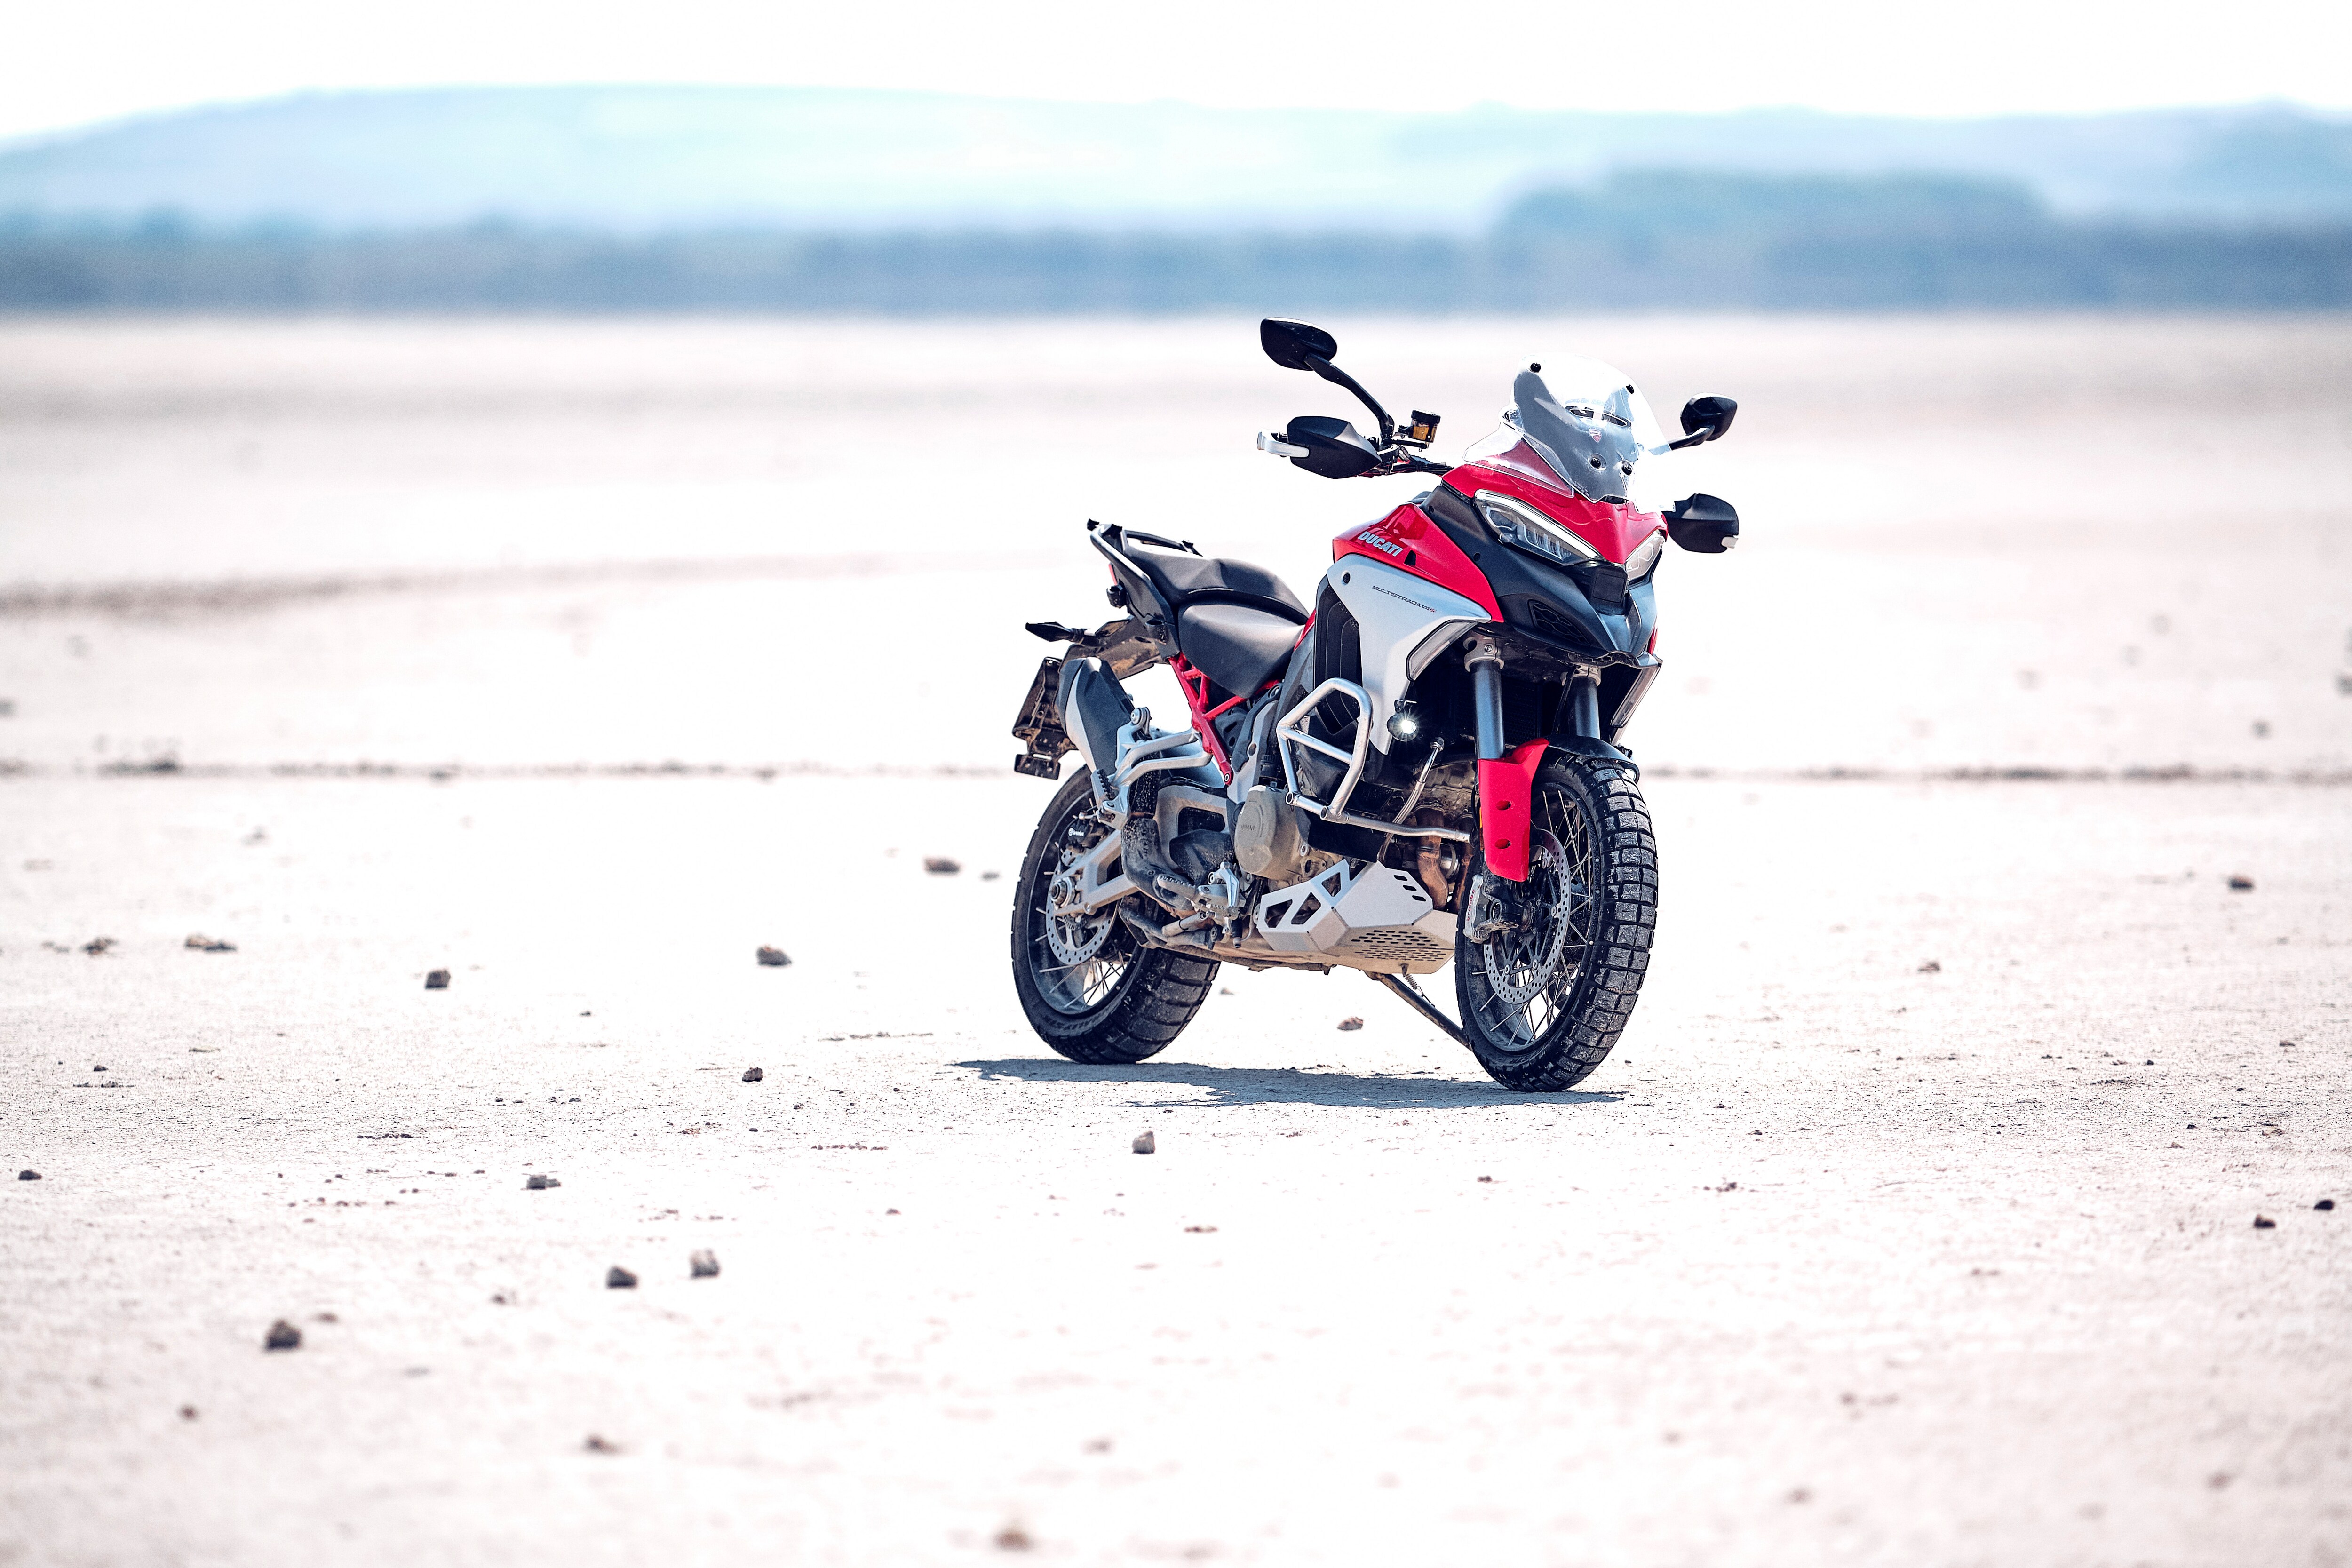 Ducati Multistrada in iconic red somewhere in an arid plain